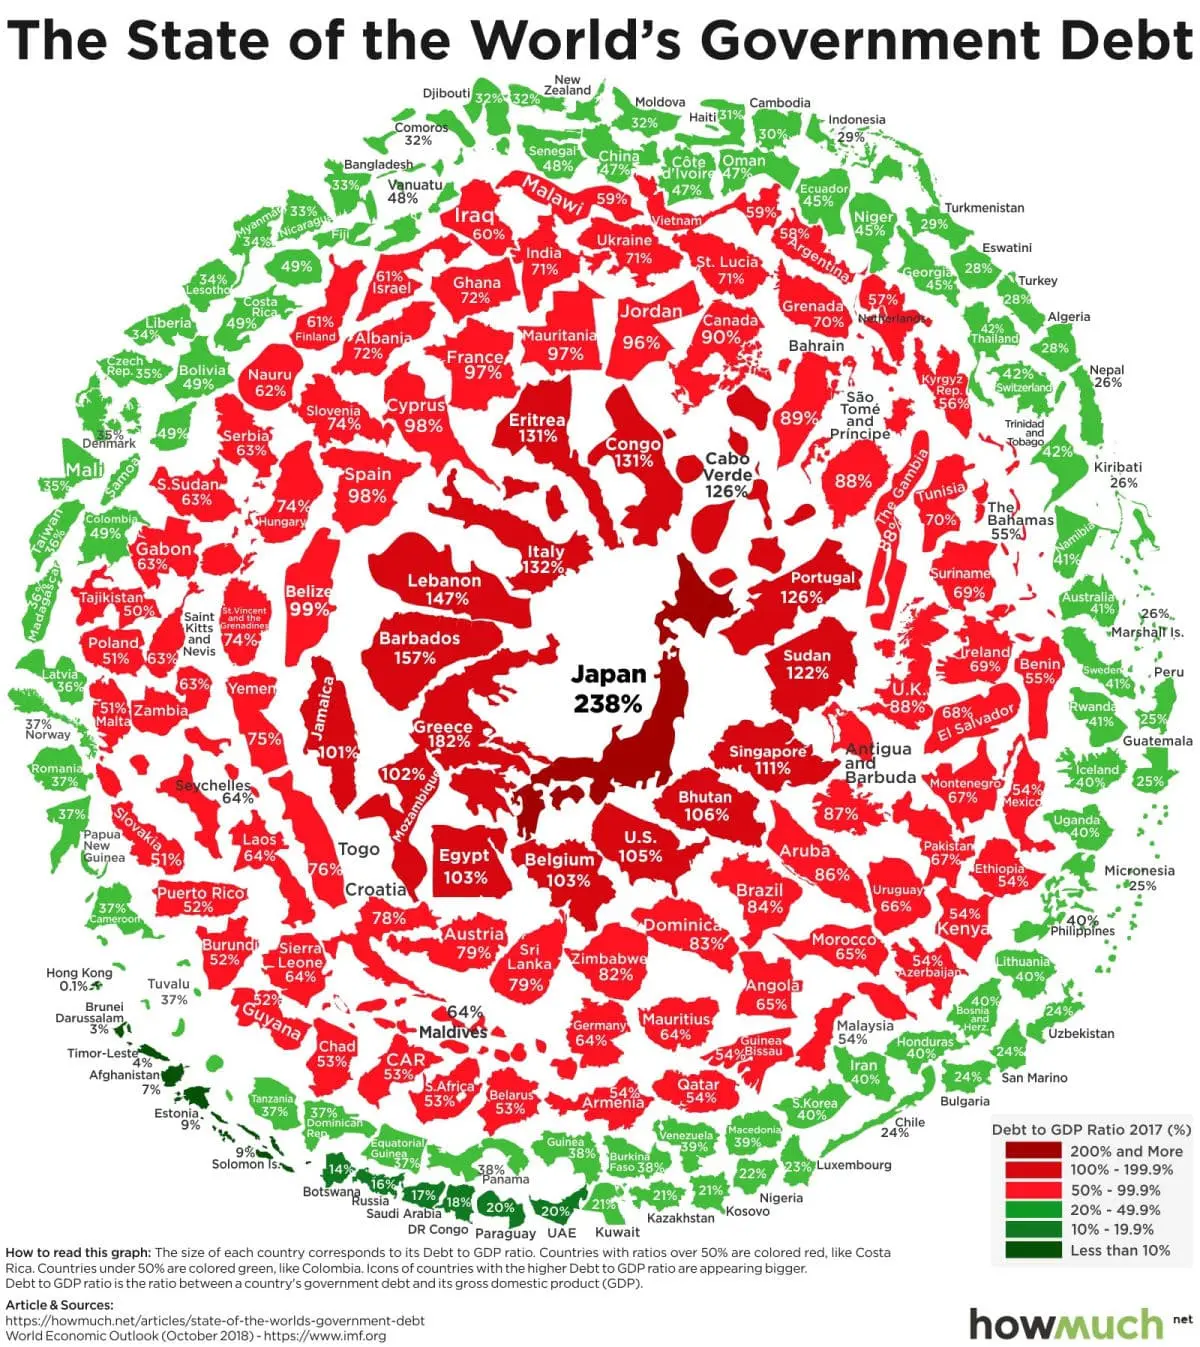 Debt of all countries